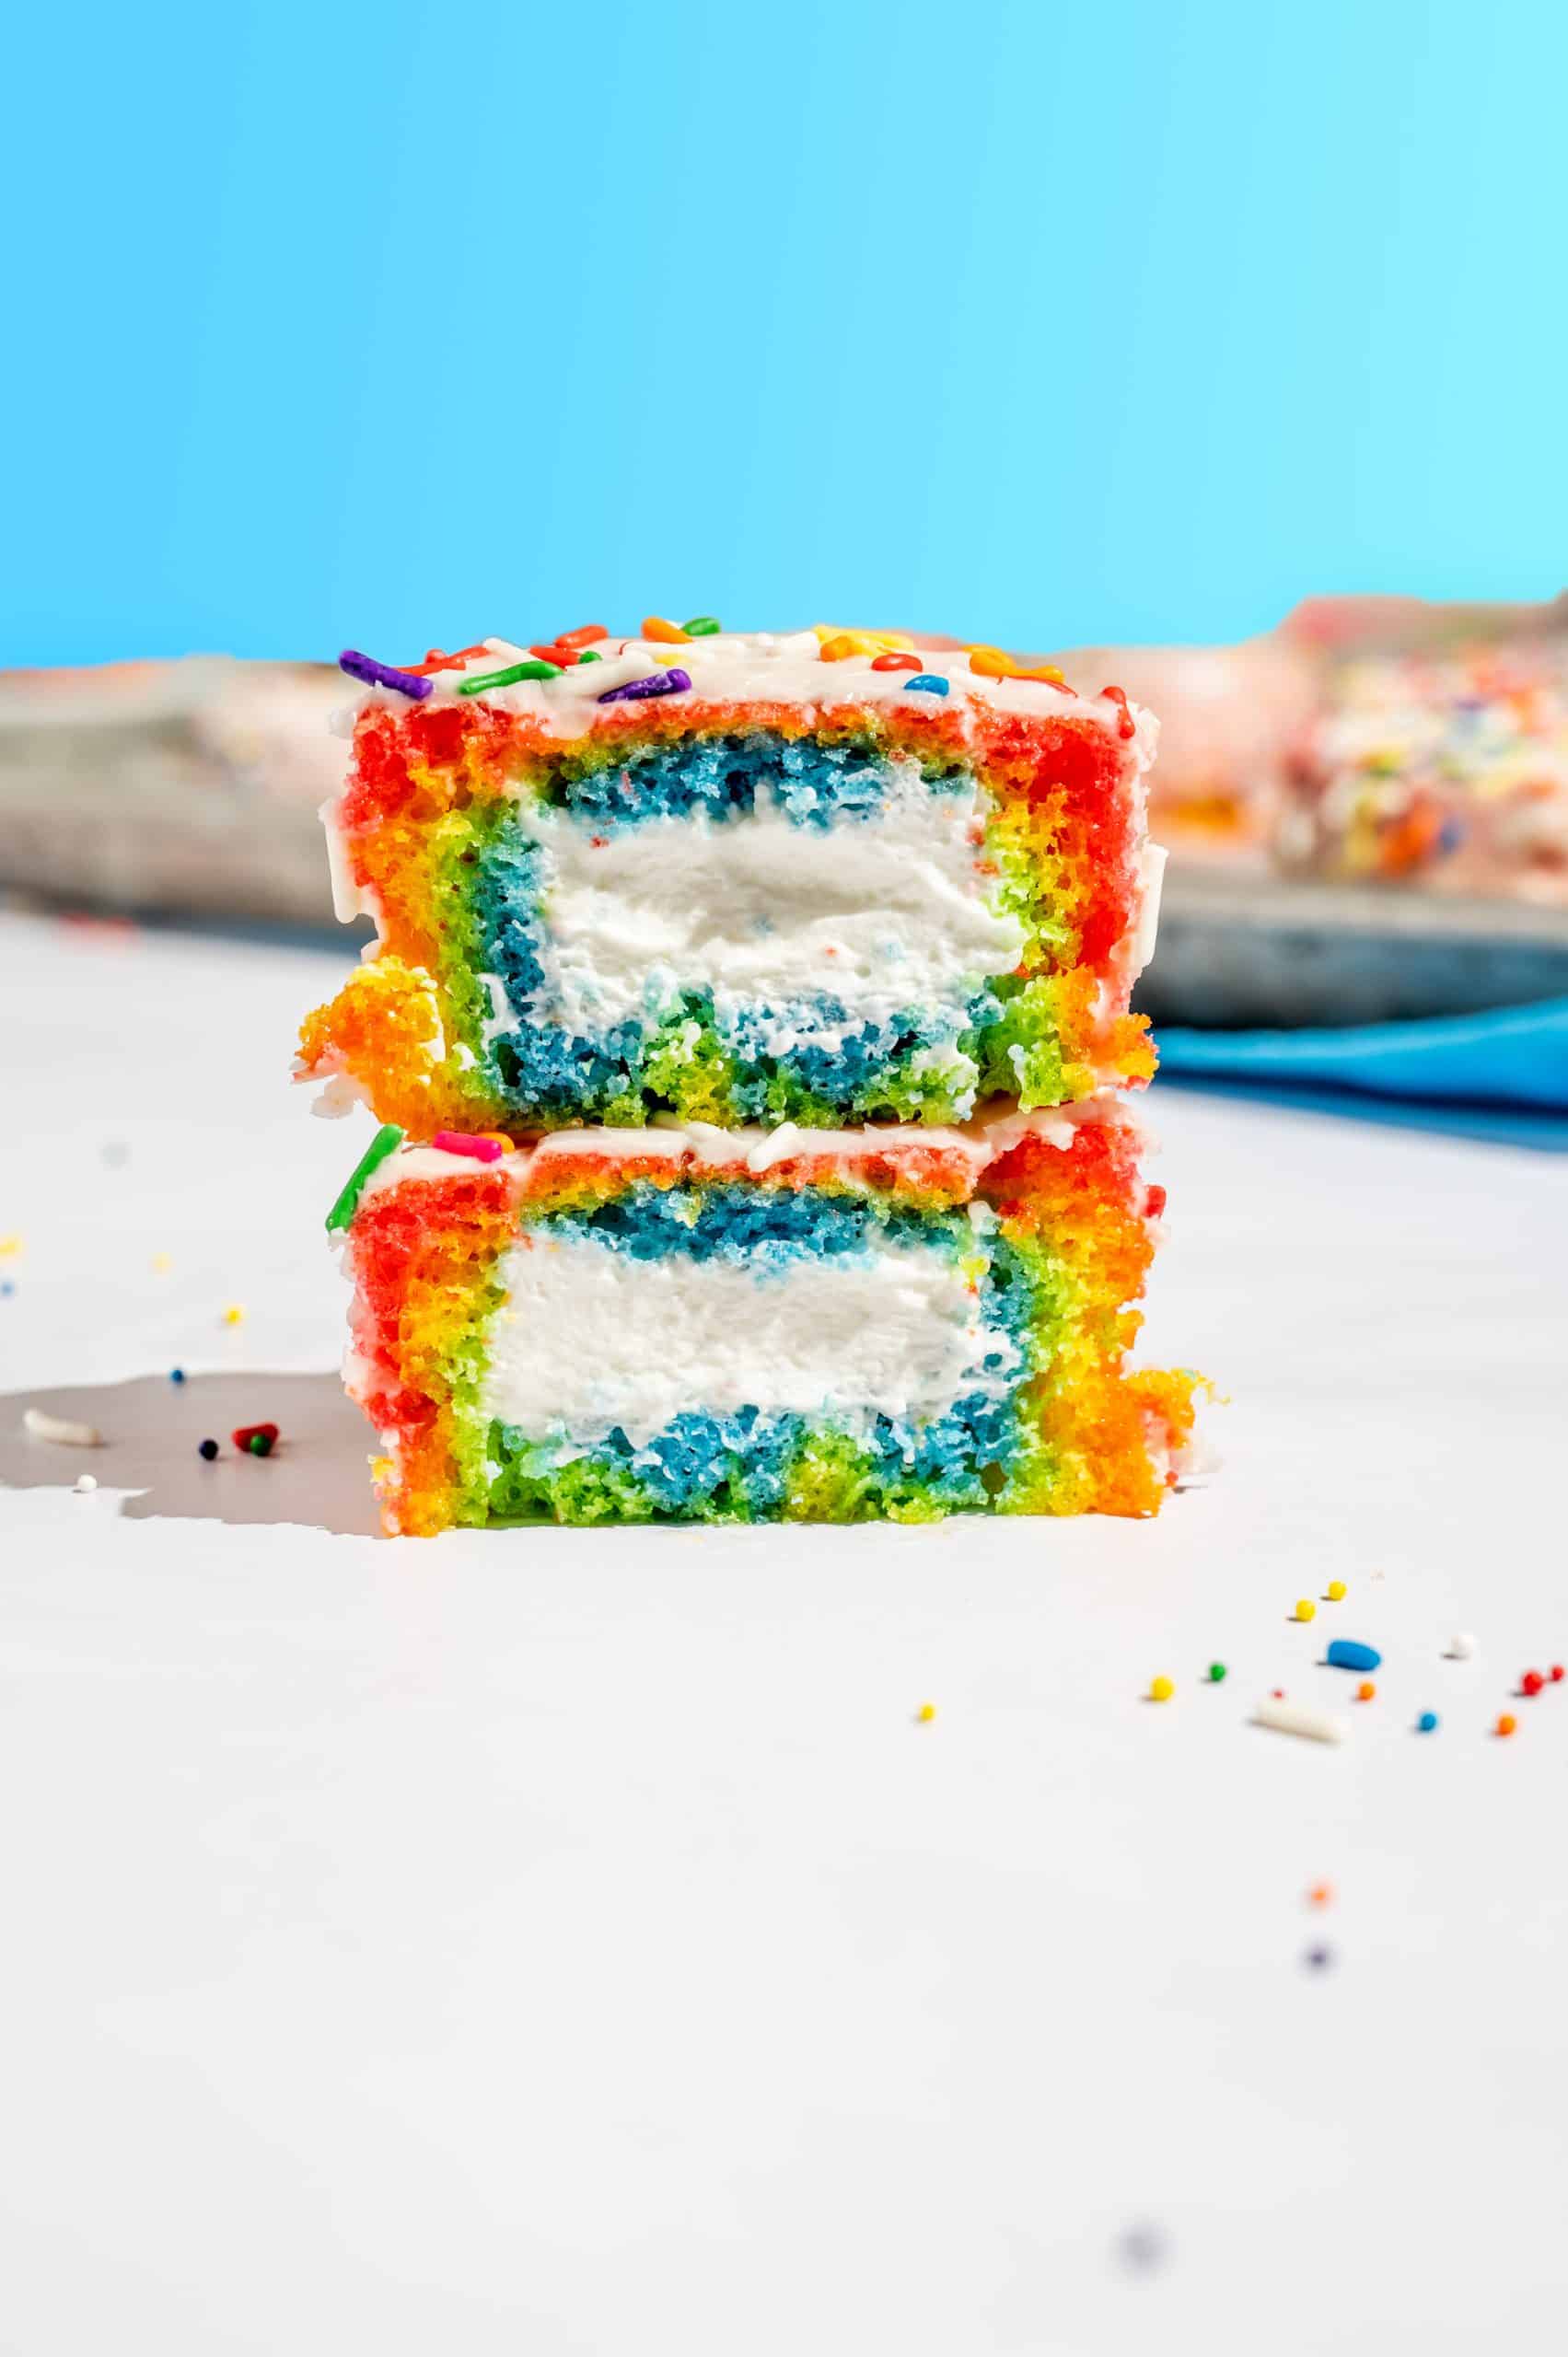 straight on view of a rainbow vanilla ding dong sliced in half and stacked to reveal rainbow cake and whipped cream filling